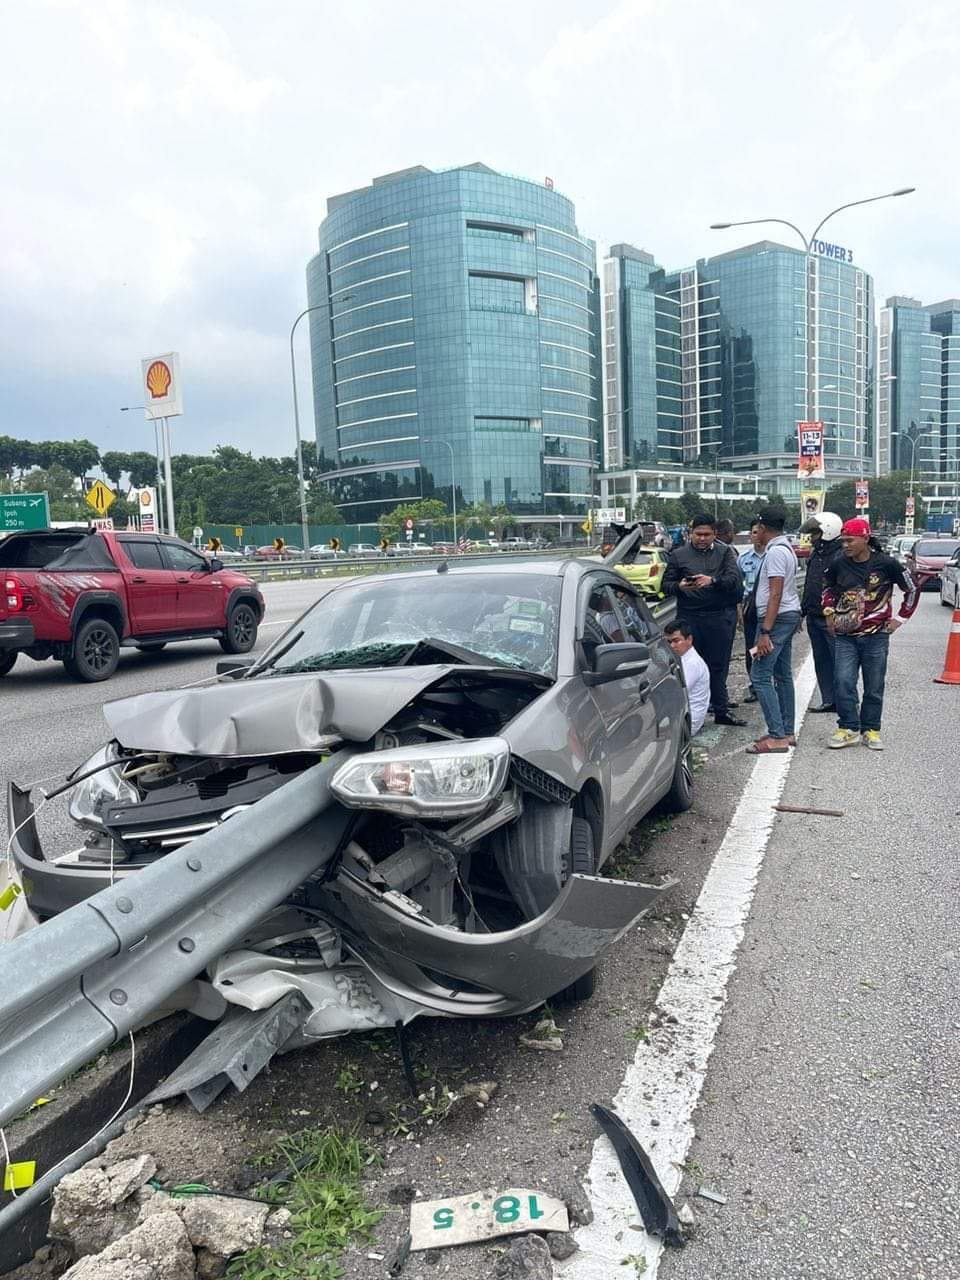 A freak accident along Federal Highway led to a metal highway guardrail piercing through a Proton Saga. Image credit: 我们是马来西亚人 We are Malaysians